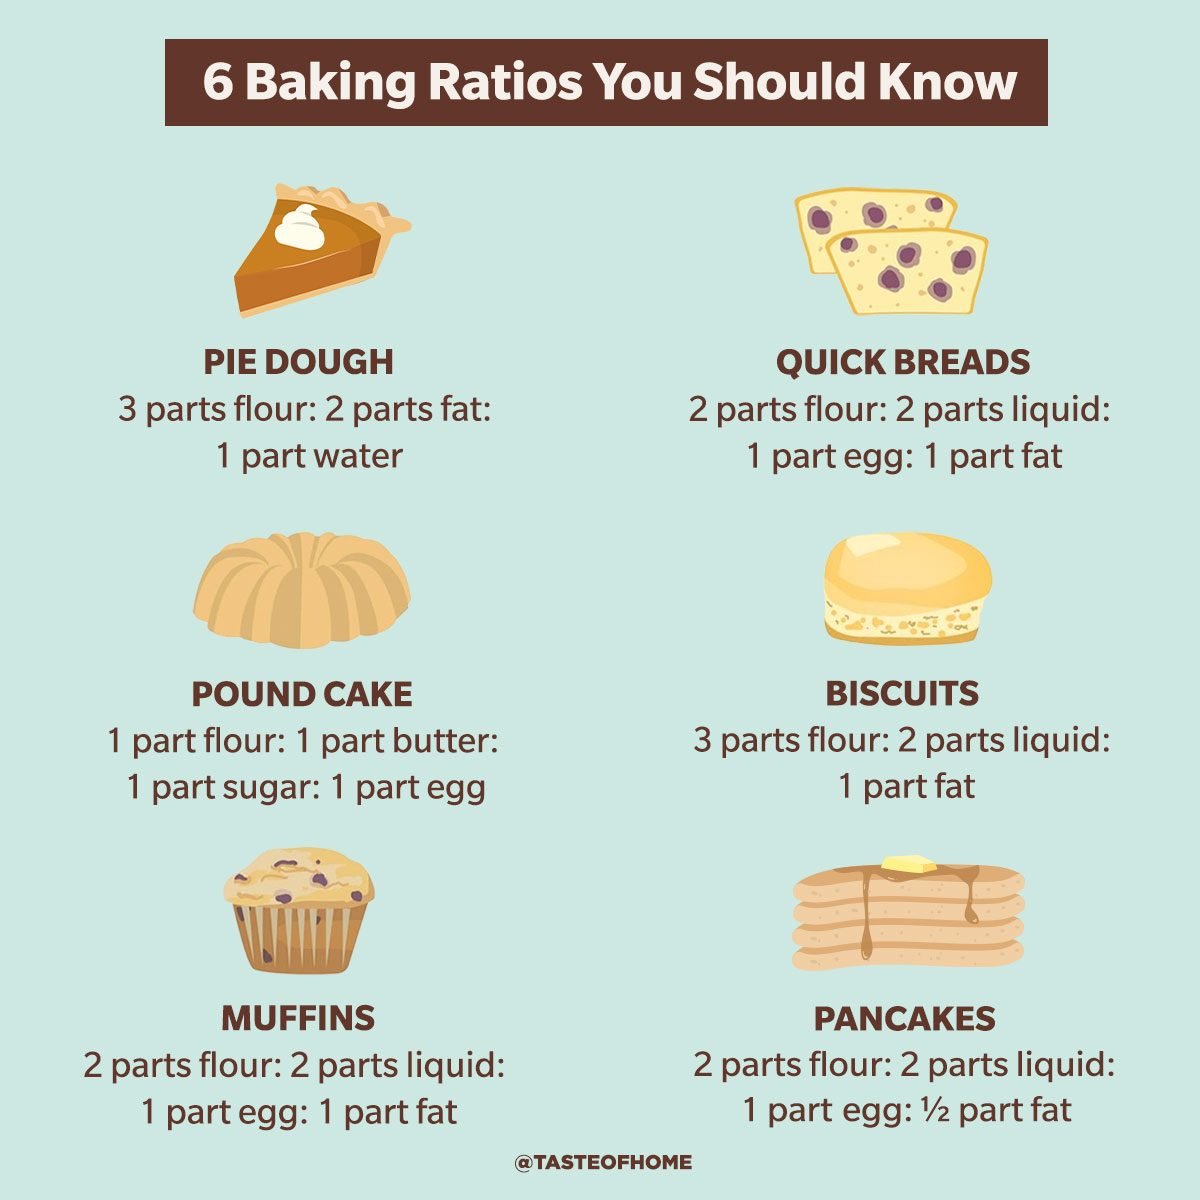 https://www.tasteofhome.com/wp-content/uploads/2021/03/6-baking-ratios-you-should-know-graphic-1200x1200-1.jpg?fit=700%2C1024